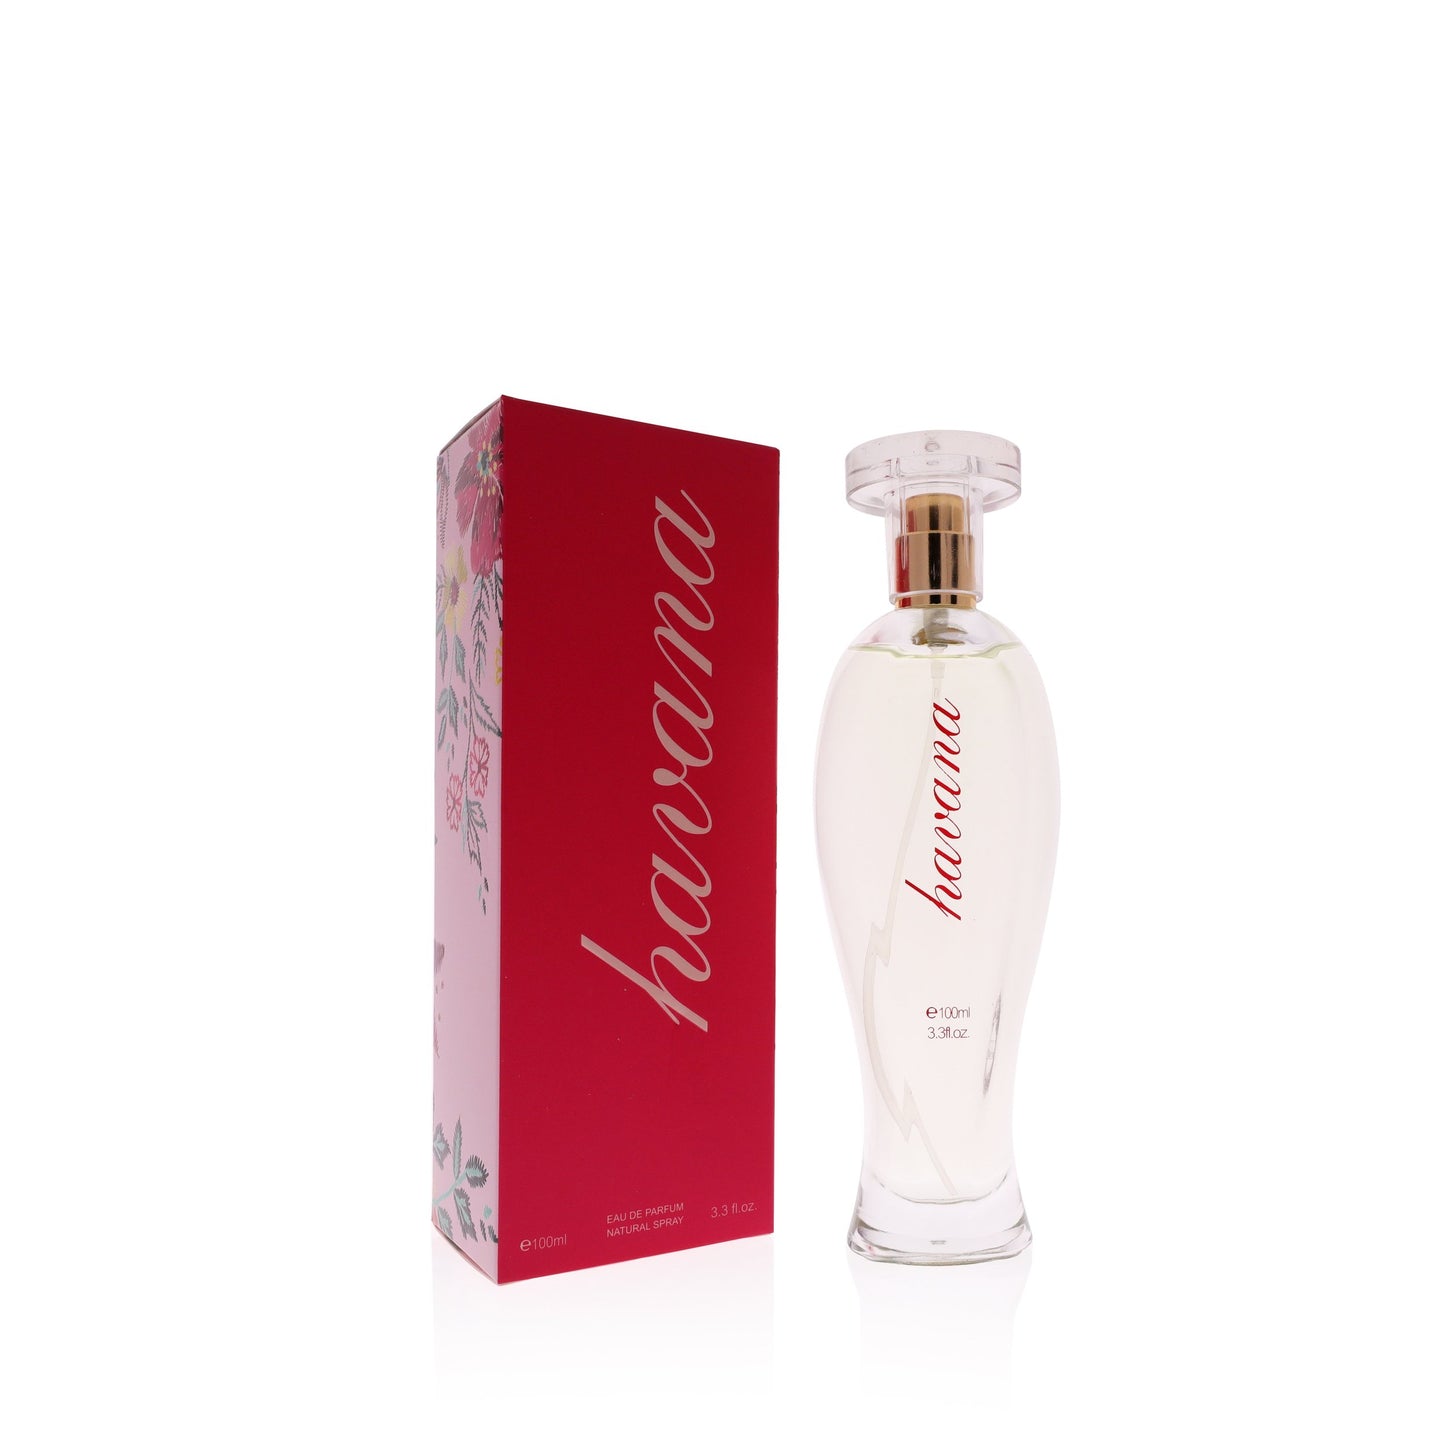 Havana Women's Fragrance: Transport Your Senses to the Exotic Vibes of Havana with this Alluring and Captivating Perfume - Perfect for the Modern Woman's Signature Style!